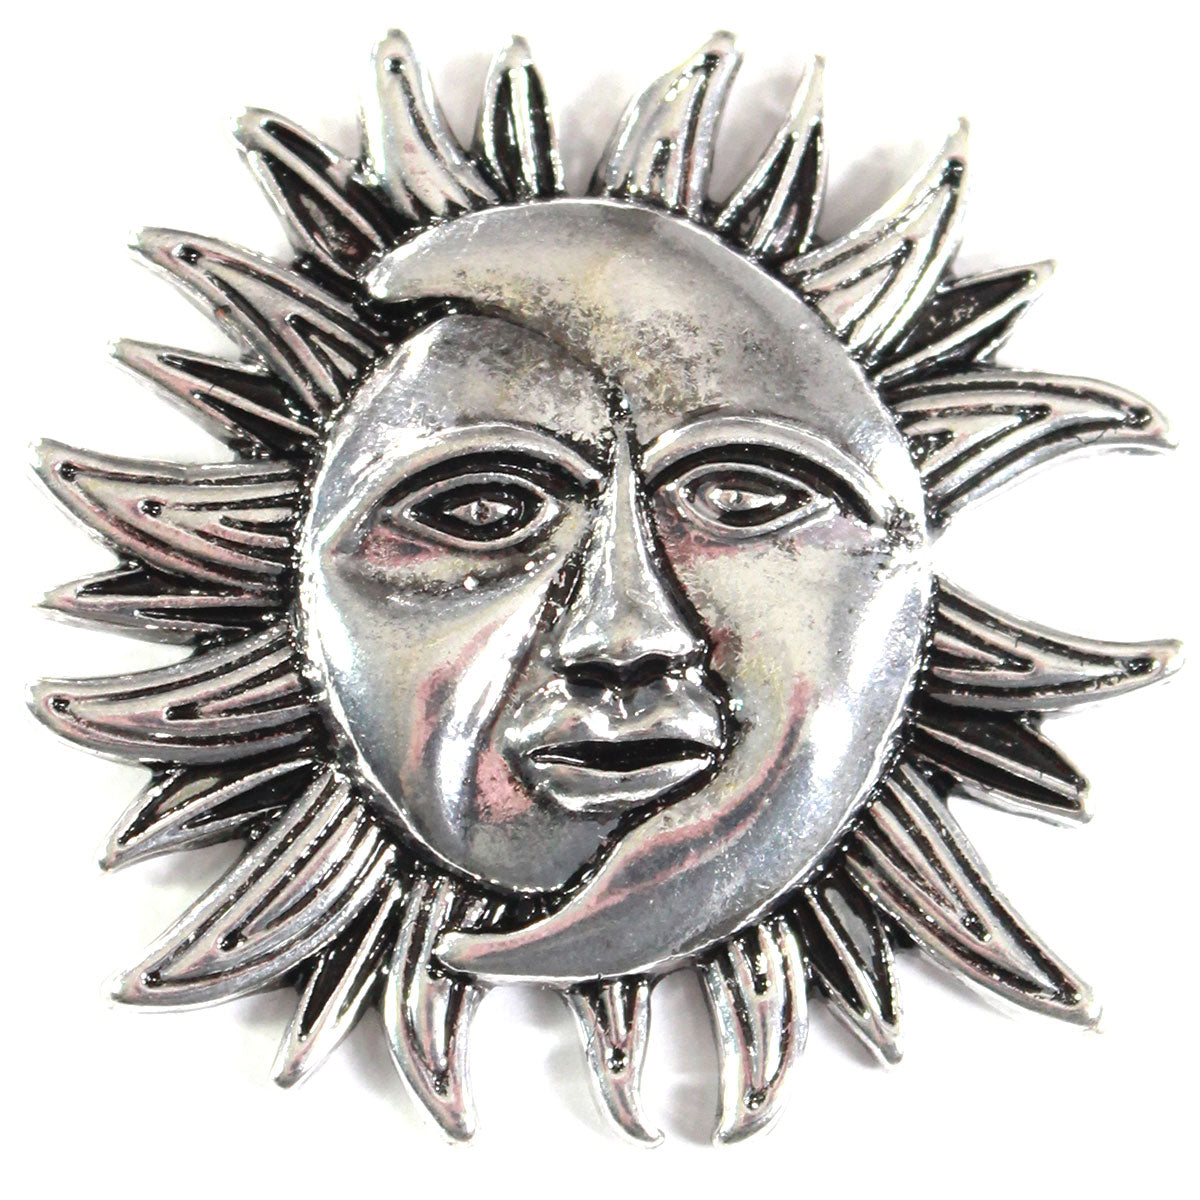 Silver half sun, half moon. Magnetic Brooch for Scarves Artistic Sculptural shapes add a personality to absolutely anything you wish to put your stamp on! The Super Strong Magnet is enough for a jacket lapel! Use to hold a sarong or cardigan together.  Great to adorn a hat or to hold a scarf in place with Fabric Safe Magnet.